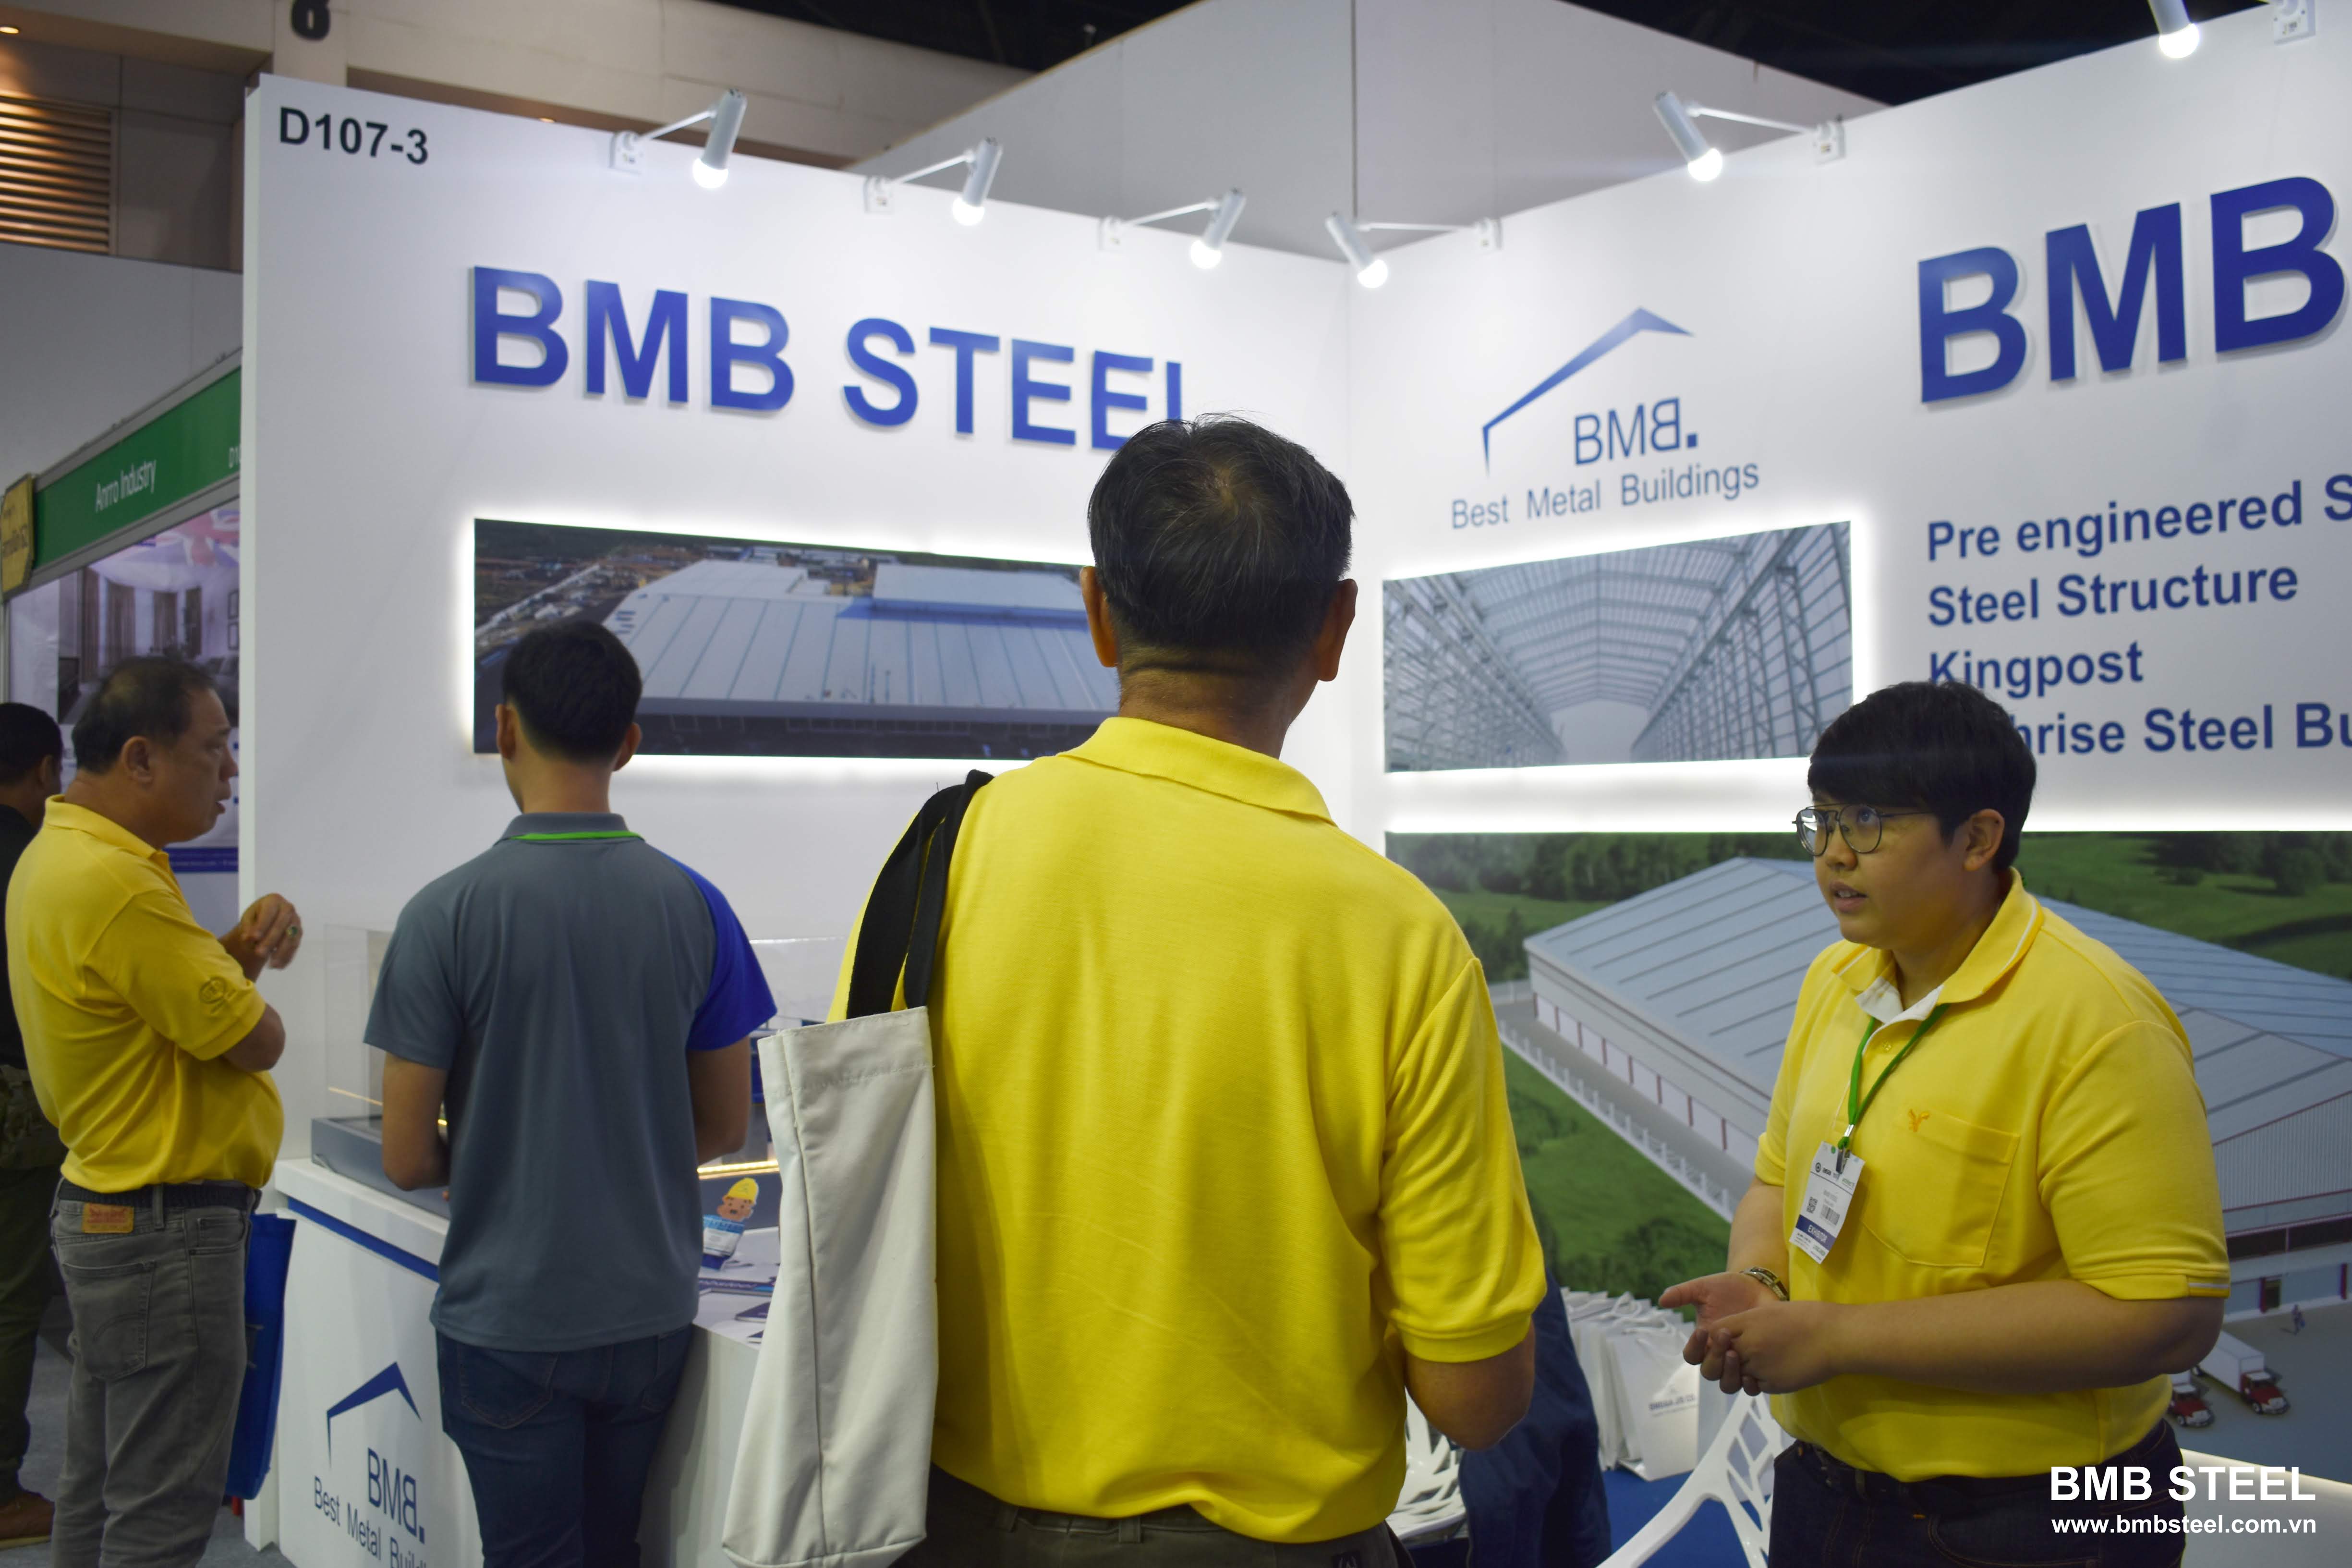 BMB Steel participated in Thai Architect'19 expo in Thailand 9